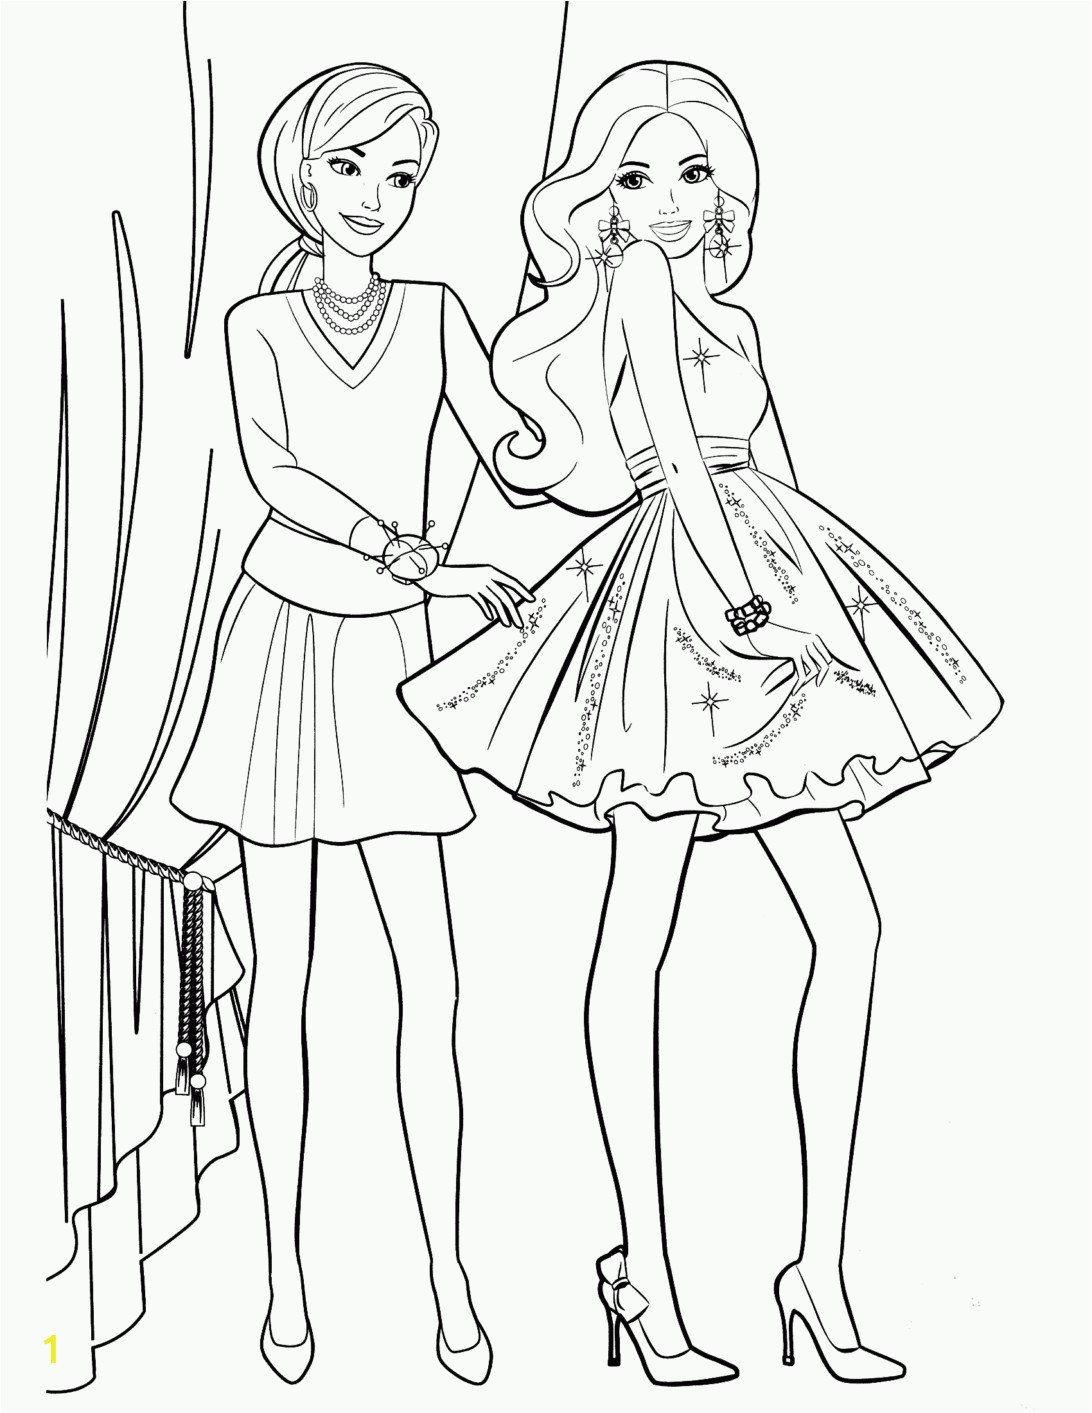 barbie dog coloring pages page door for all ages htm and the diamond castle camper head doll ruth handler dress styling spy squad set magic of pegasus sisters 1092x1413